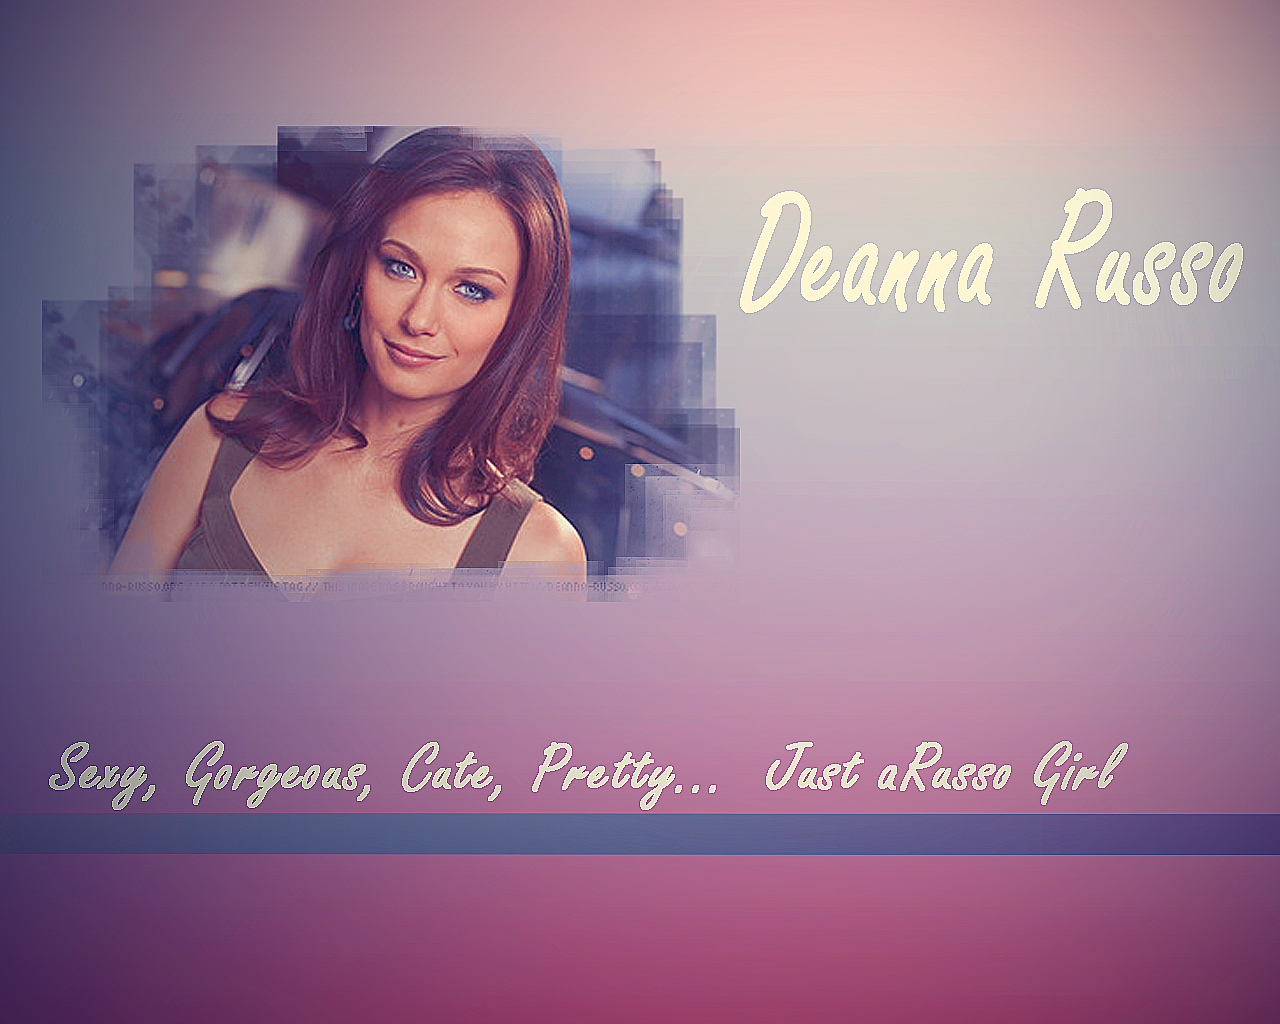 Sexy deanna russo Celebrity Models: